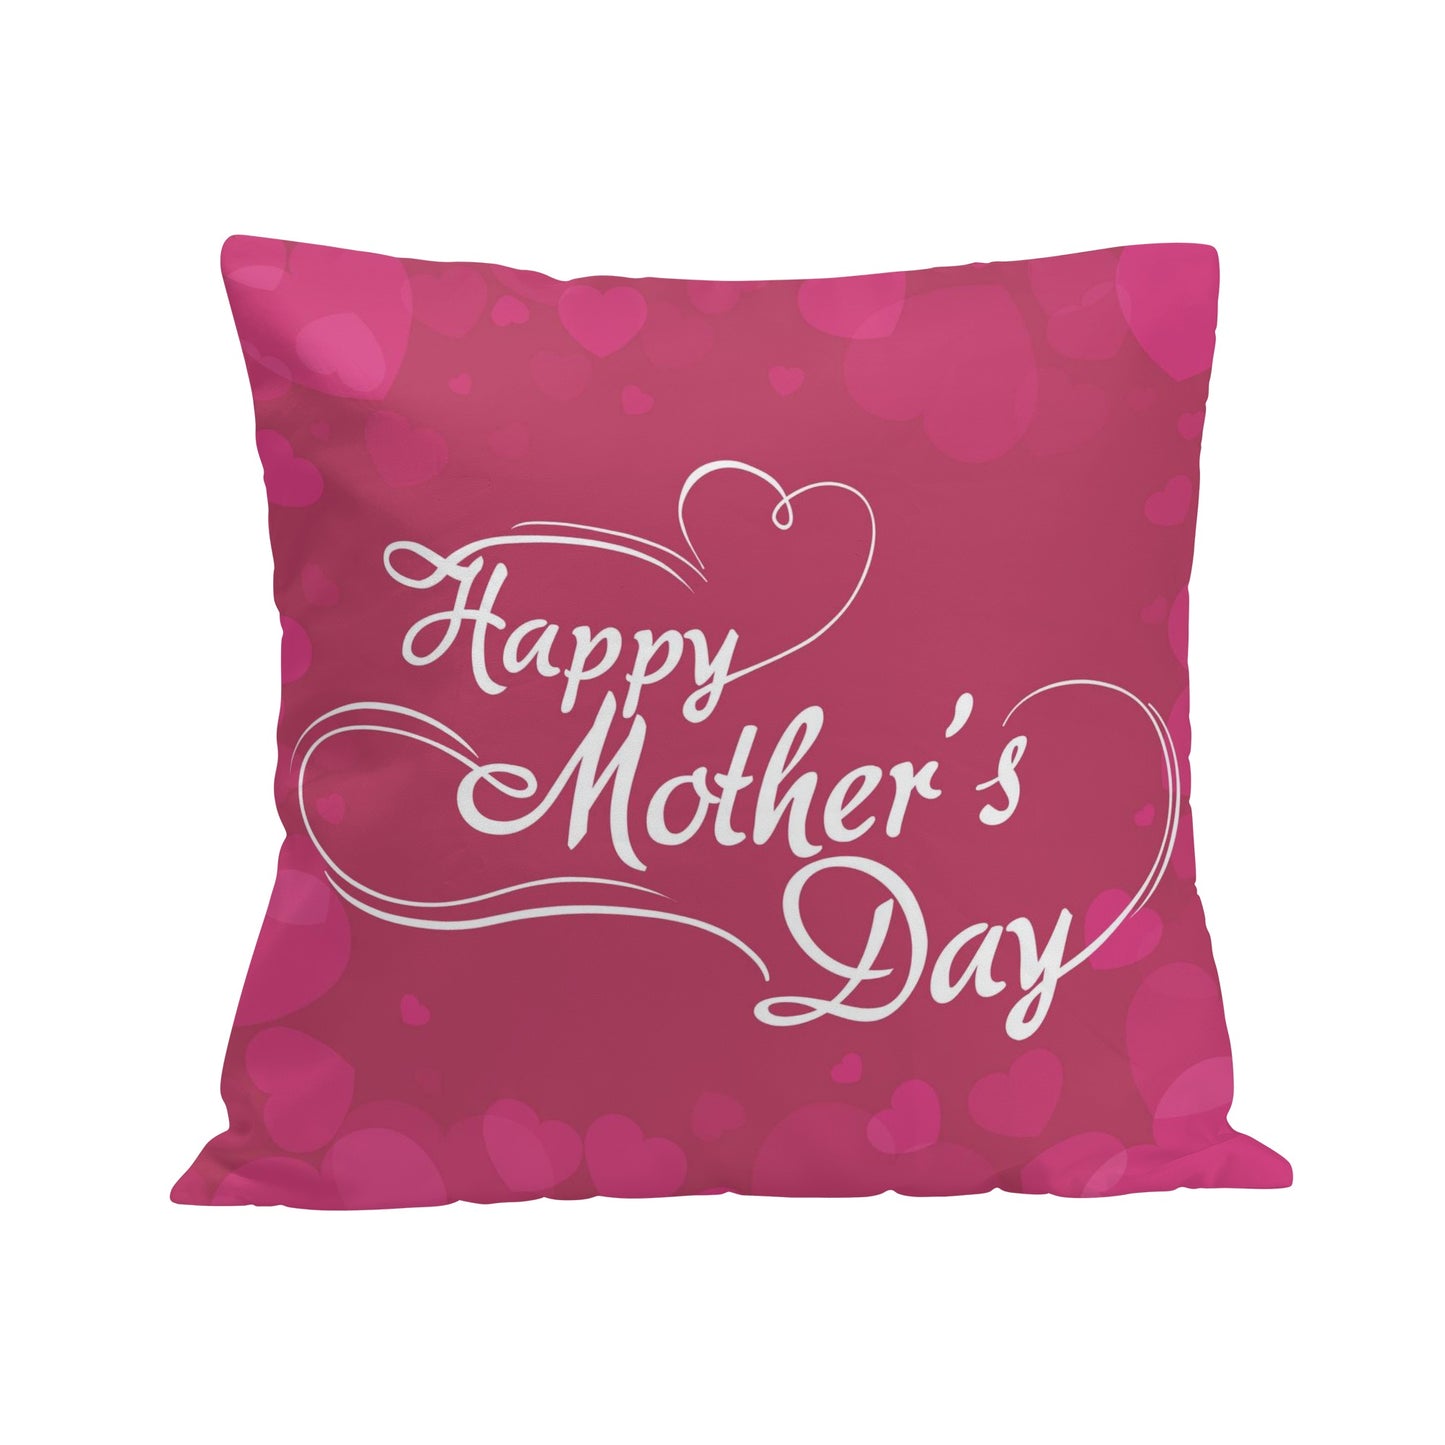 Beautiful Pink with Hearts Mothers Day Pillow Cover A Gift That Says I Care